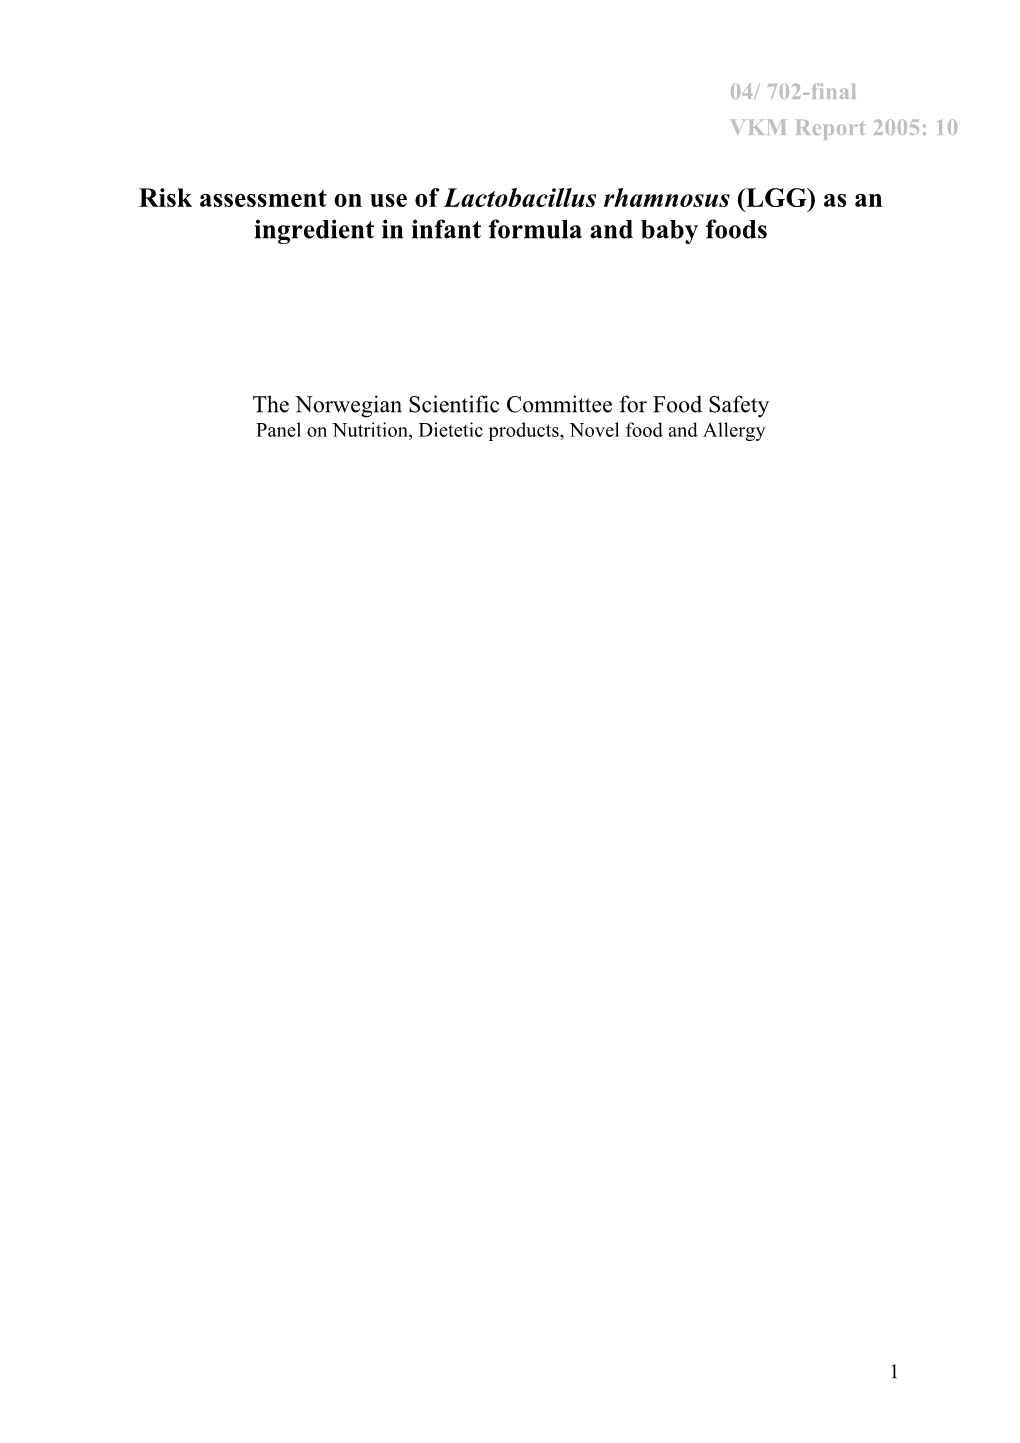 Risk Assessment on Use of Lactobacillus Rhamnosus (LGG) As an Ingredient in Infant Formula and Baby Foods